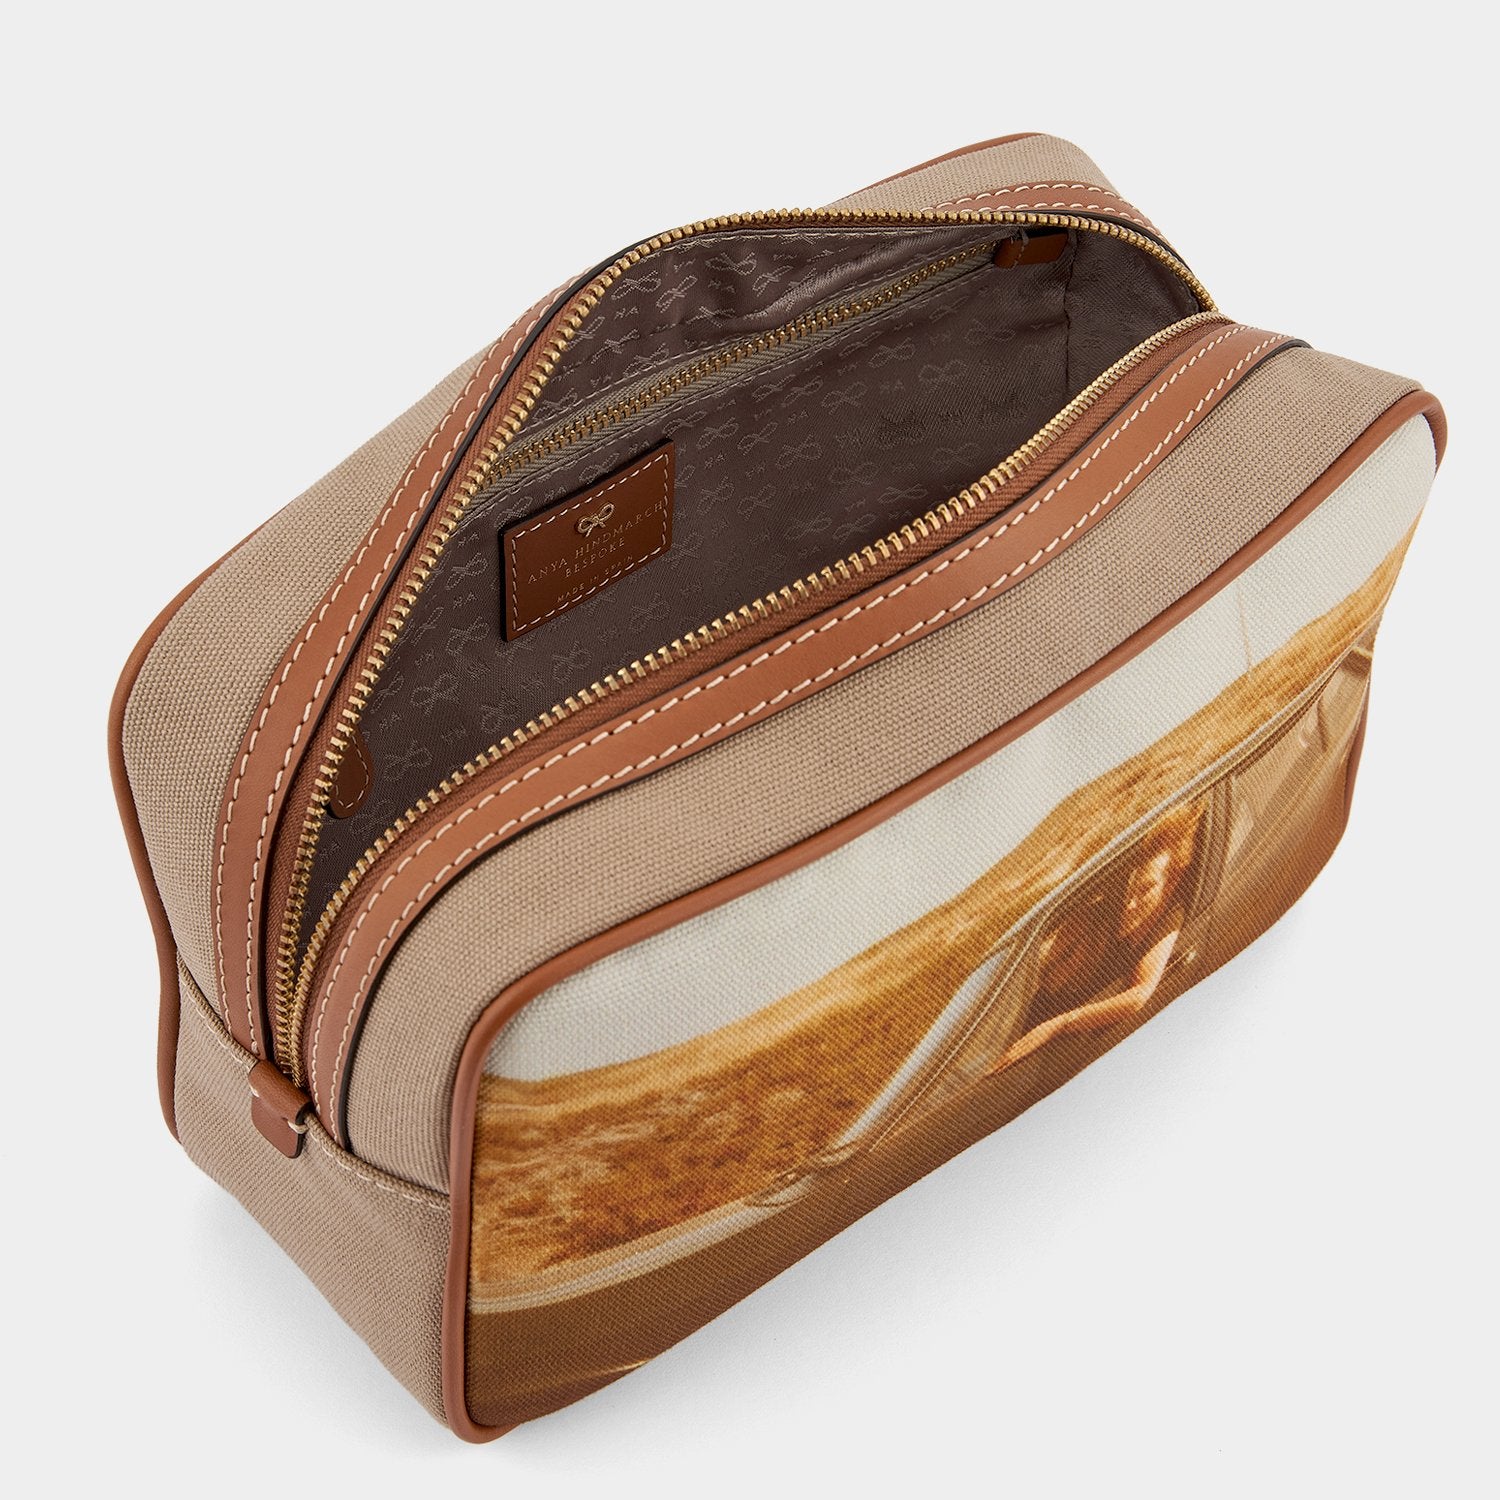 Be A Bag Large Wash bag -

                  
                    Recyled Canvas in Tan -
                  

                  Anya Hindmarch US
